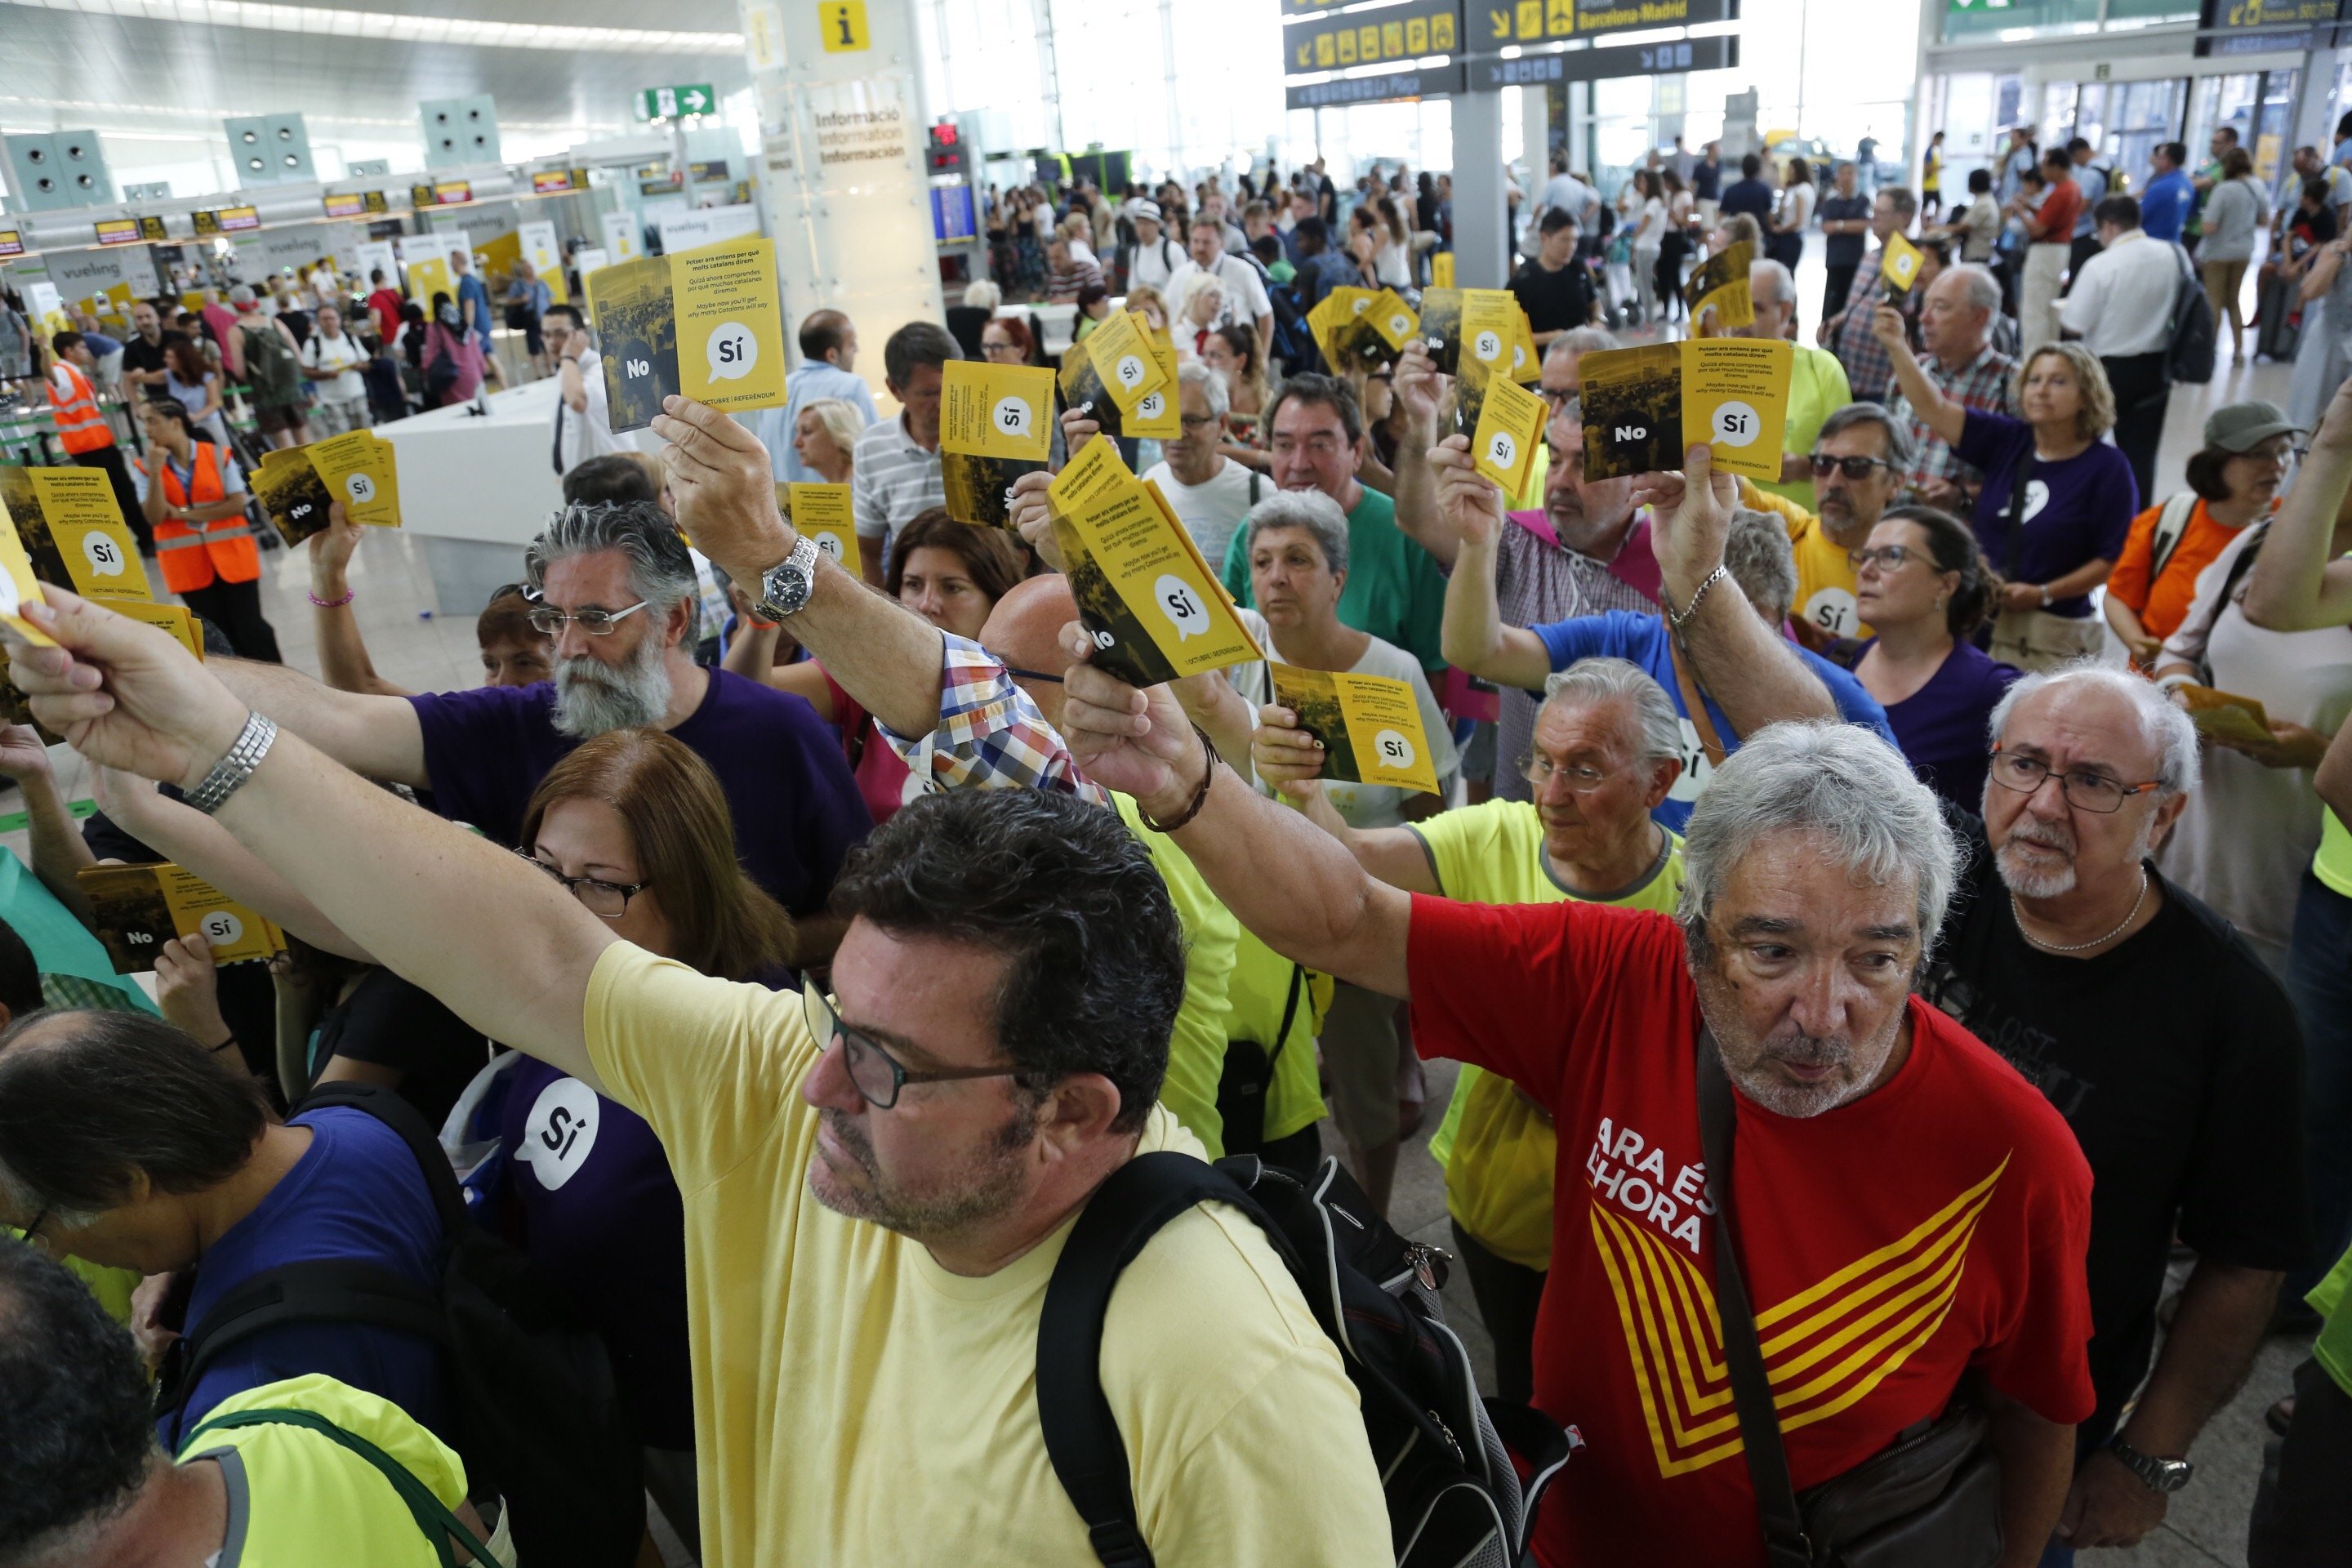 The ANC bursts in on the strike at Barcelona's El Prat airport, asking for independence